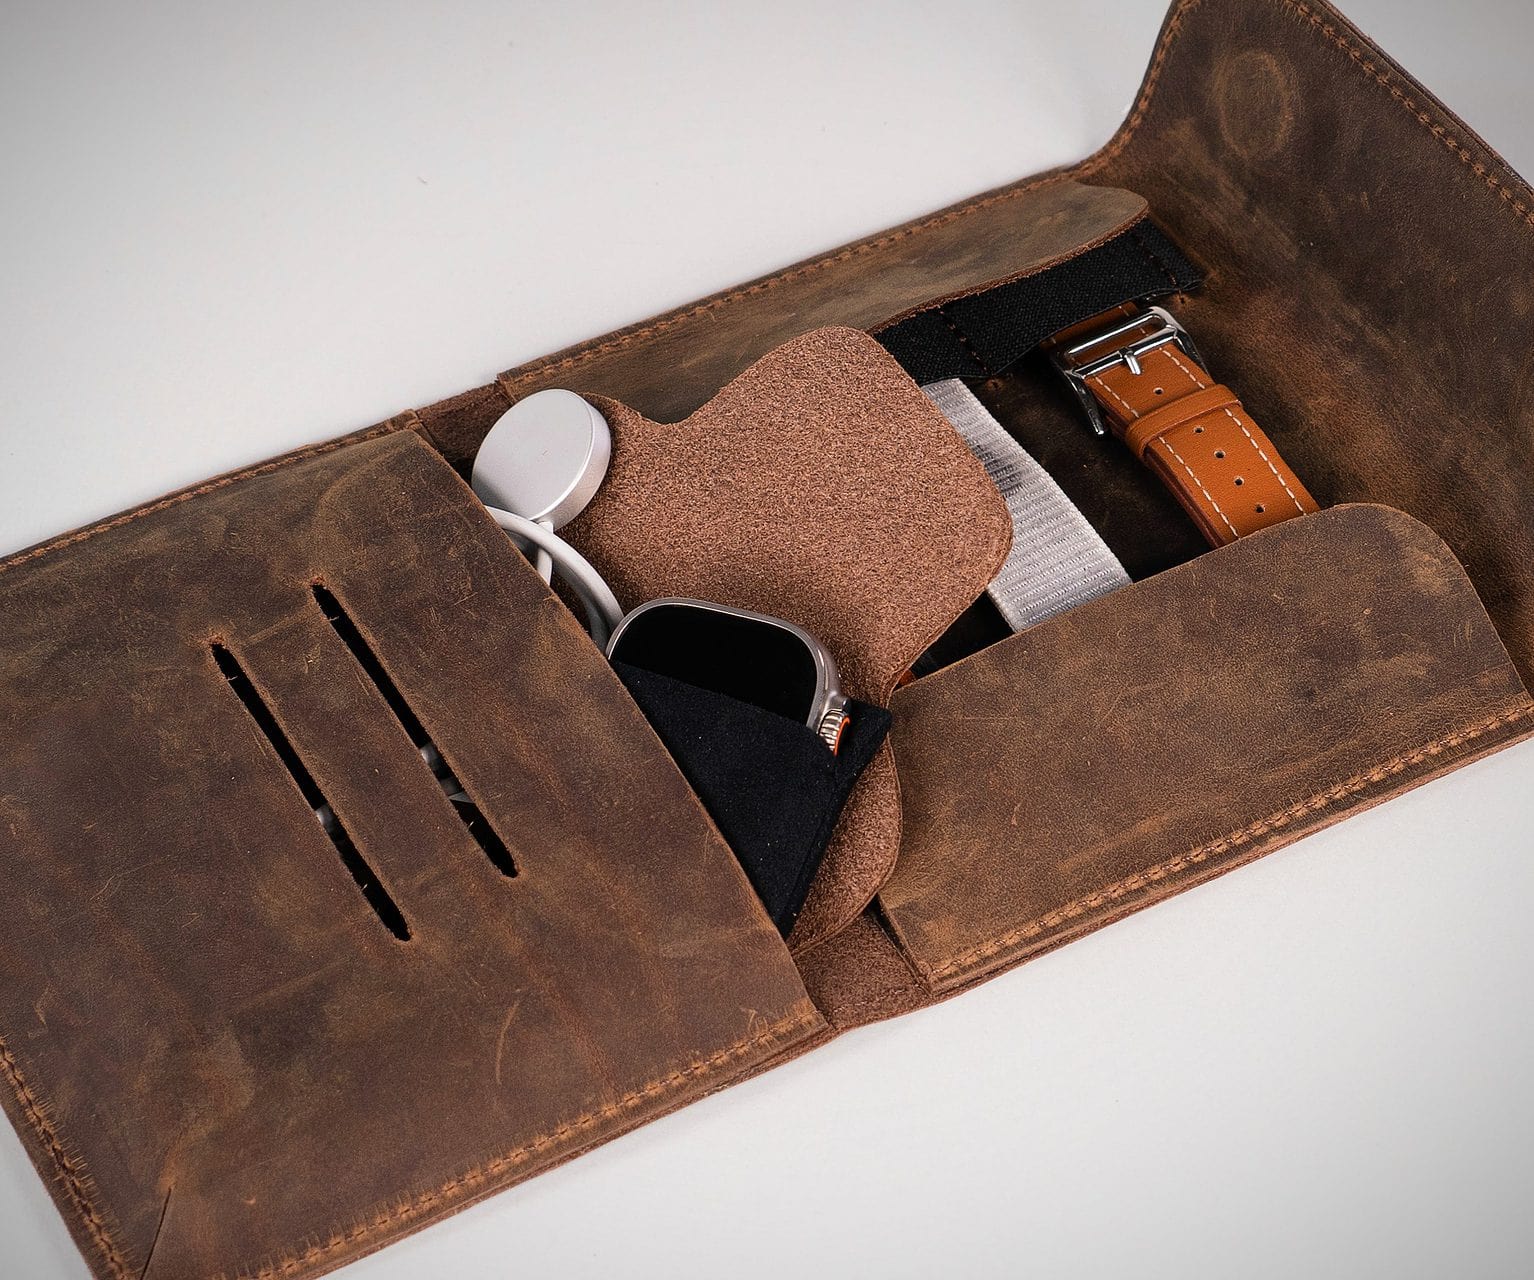 WaterField Designs Time Travel Case: A place for everything, and everything in its place.